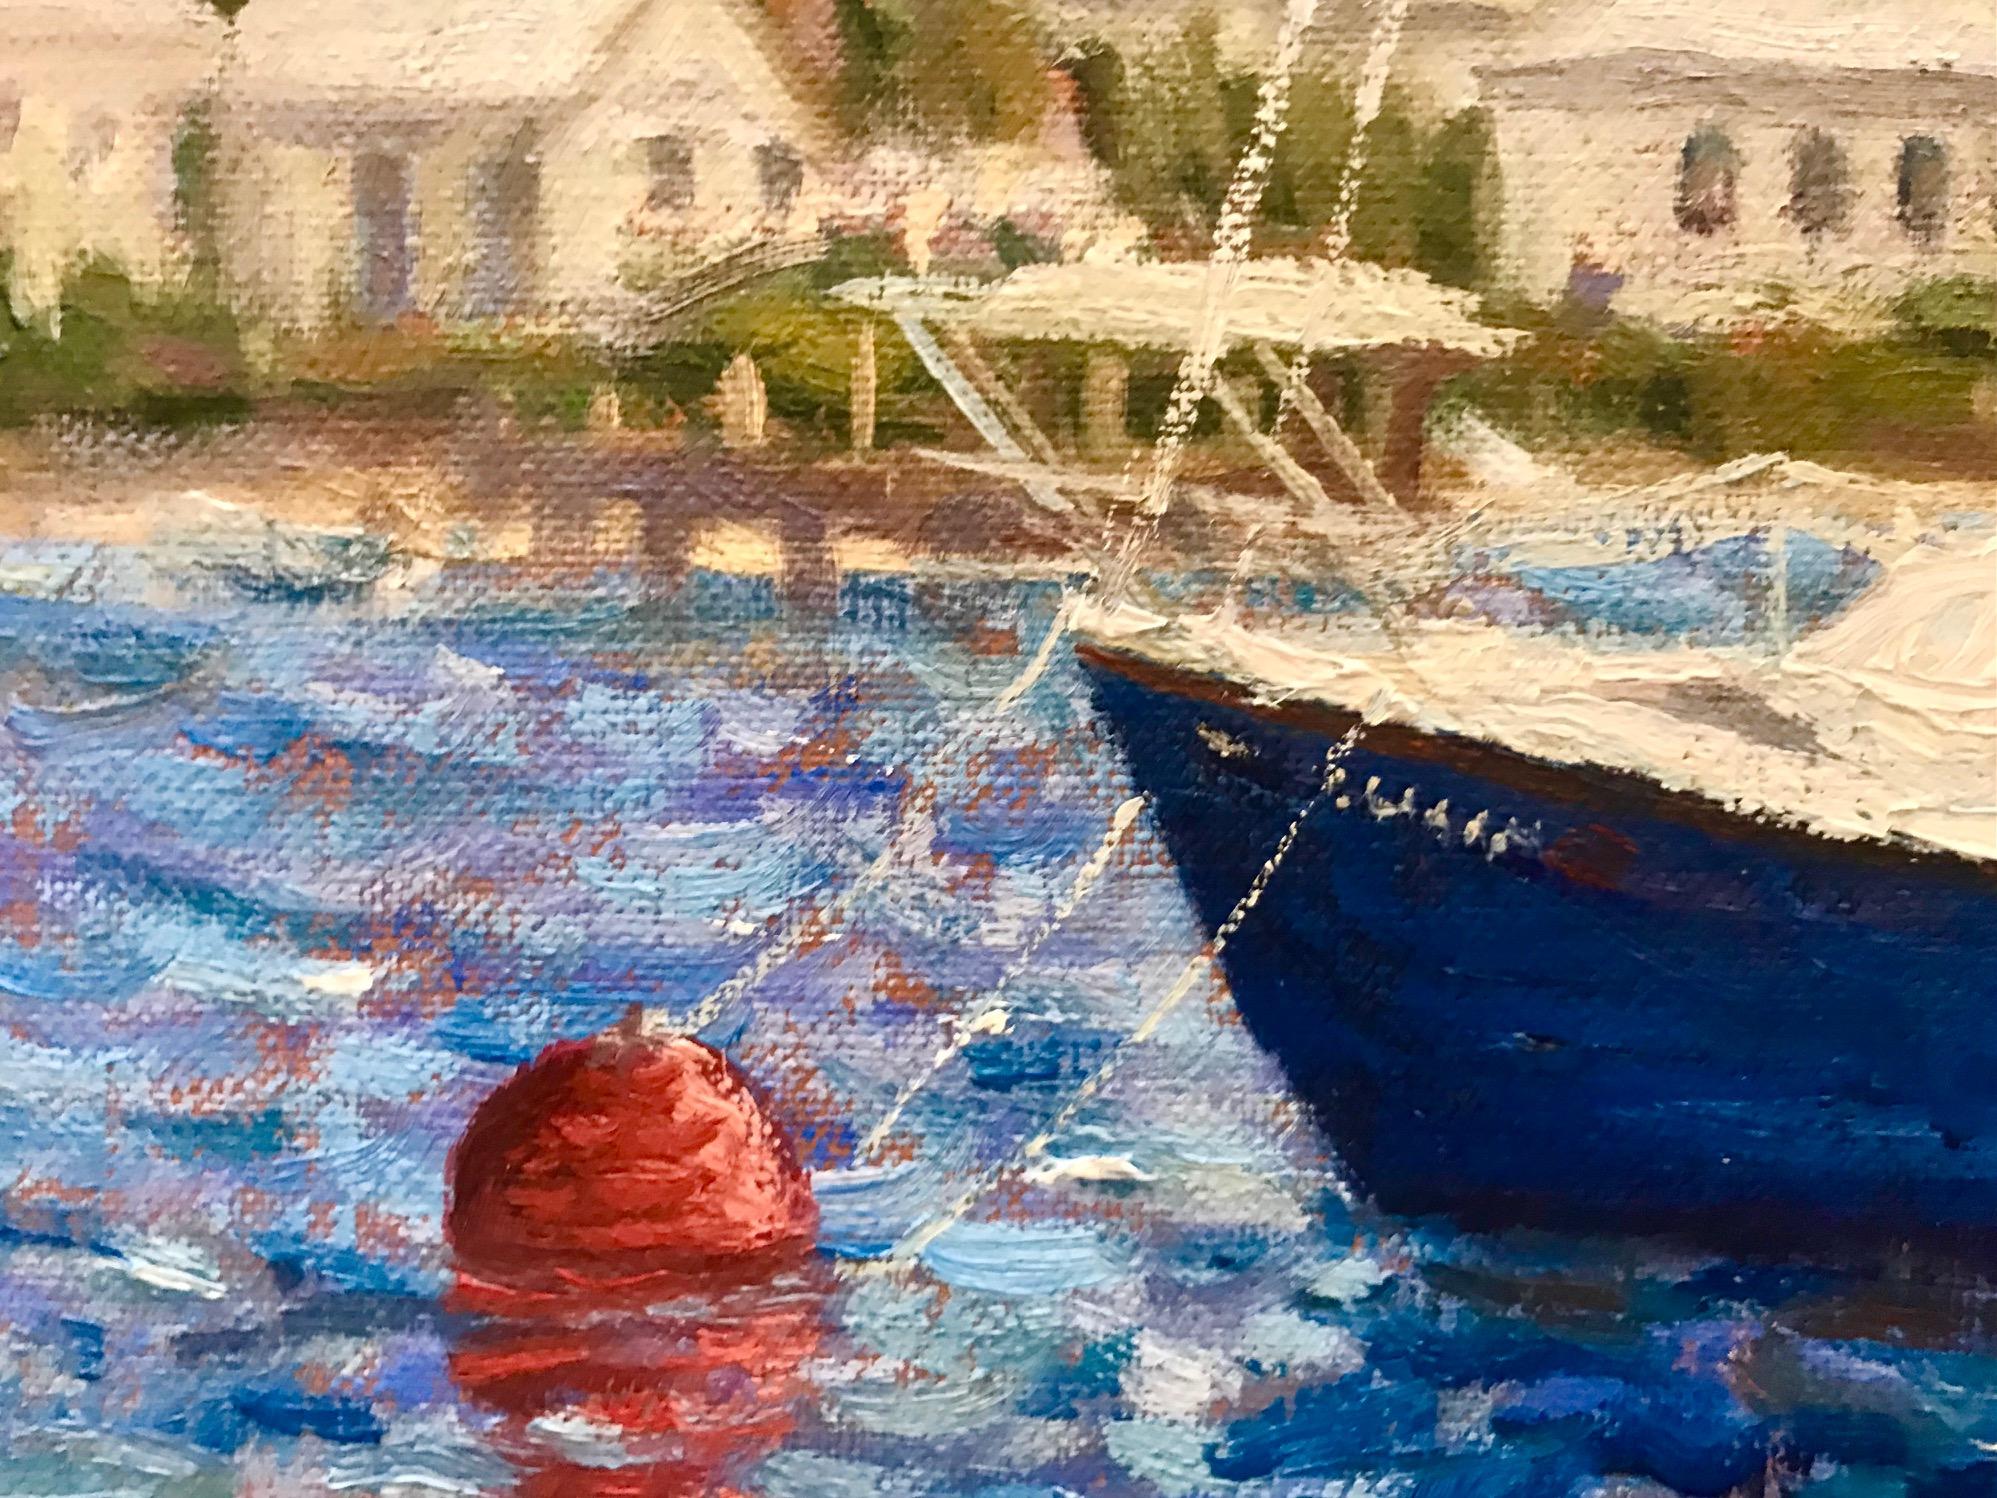 Artist: Christophe Cardot, French
Title: The Red Buoy
Medium:  Oil on Canvas
Size: Unframed: 15.5